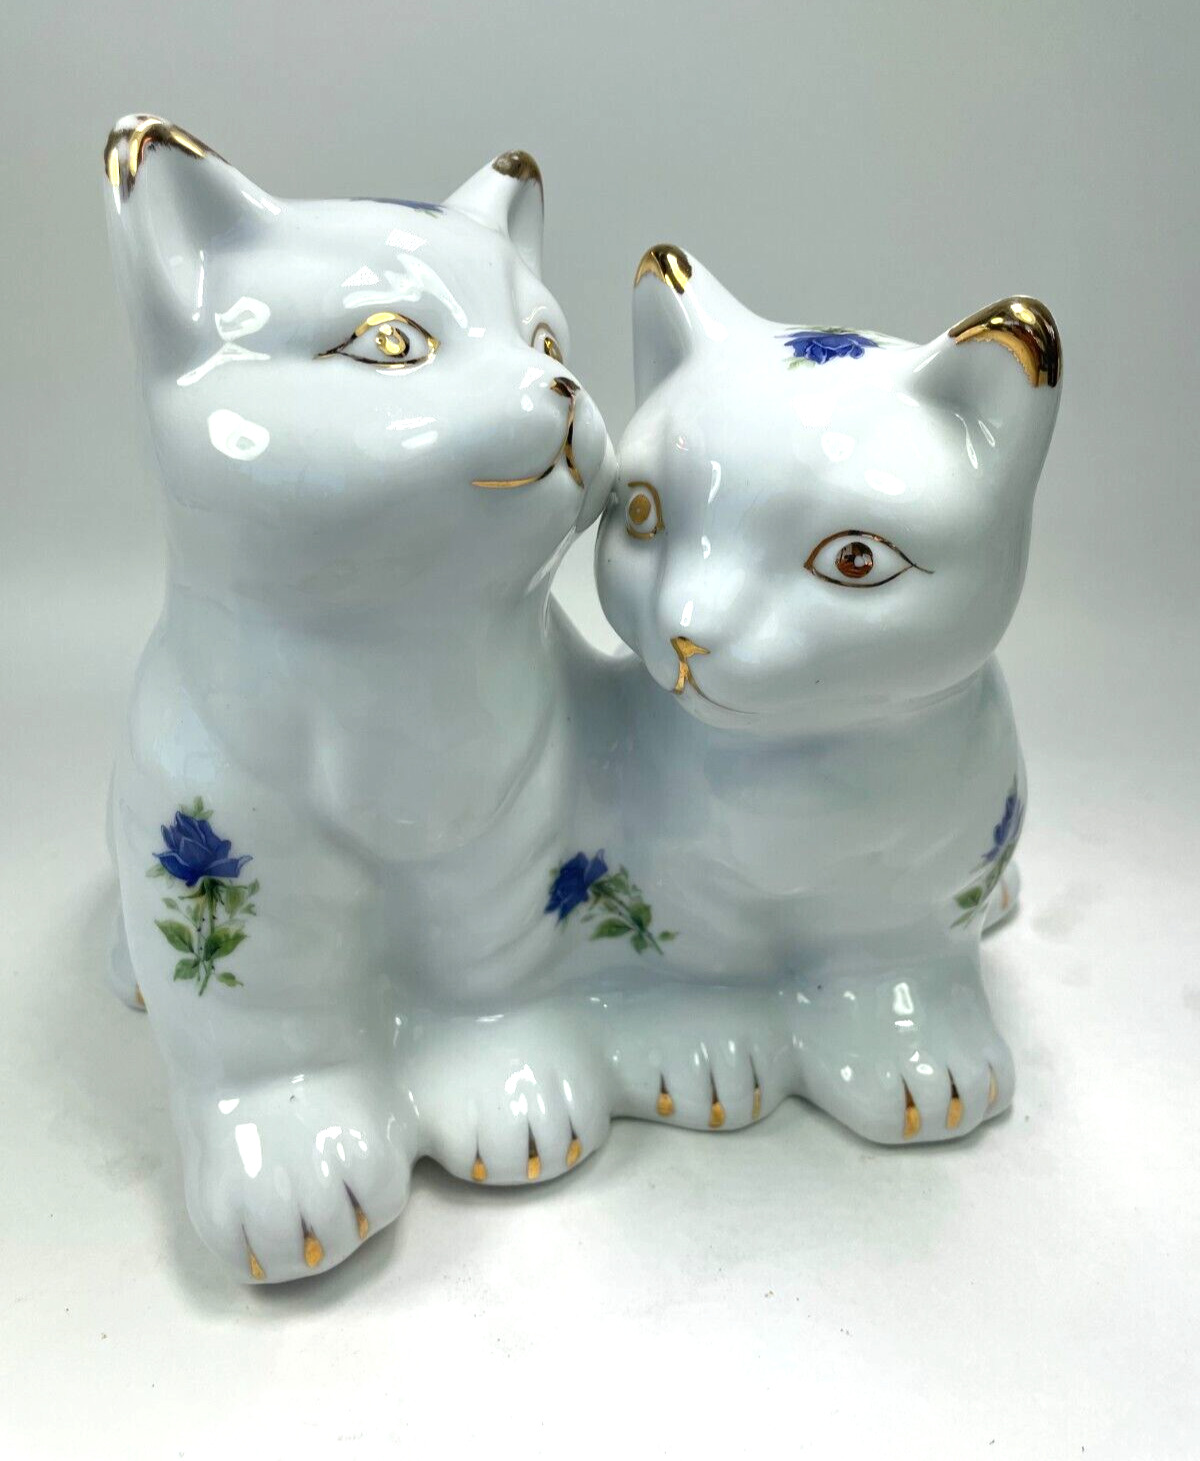 Cats Kittens Floral Figurine Statue by Formalities Baum Bros Gold Trim Ad4